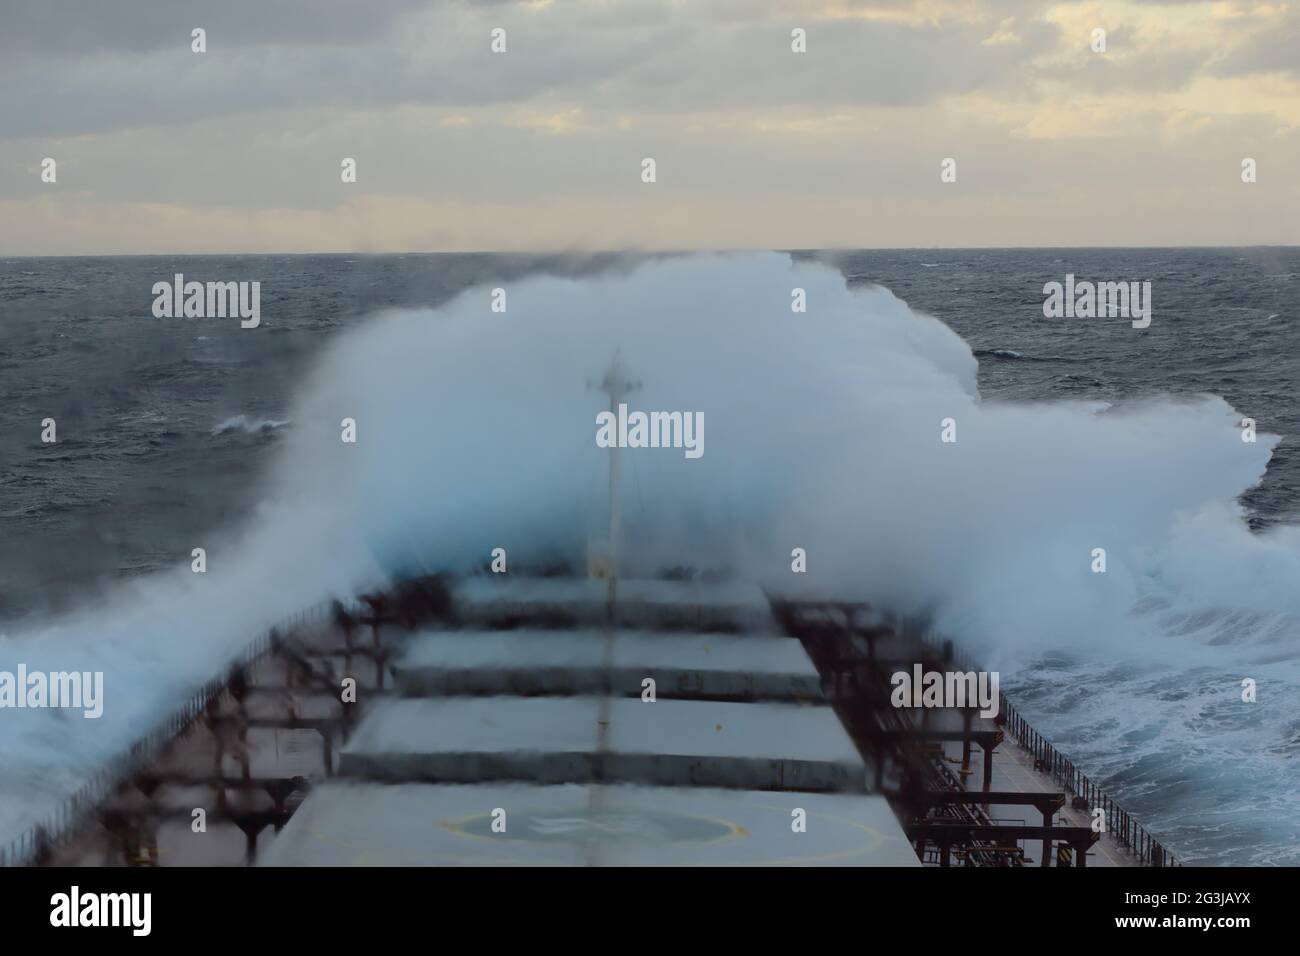 Storm at sea - waves crashing over the boat, view from the bridge Stock Photo